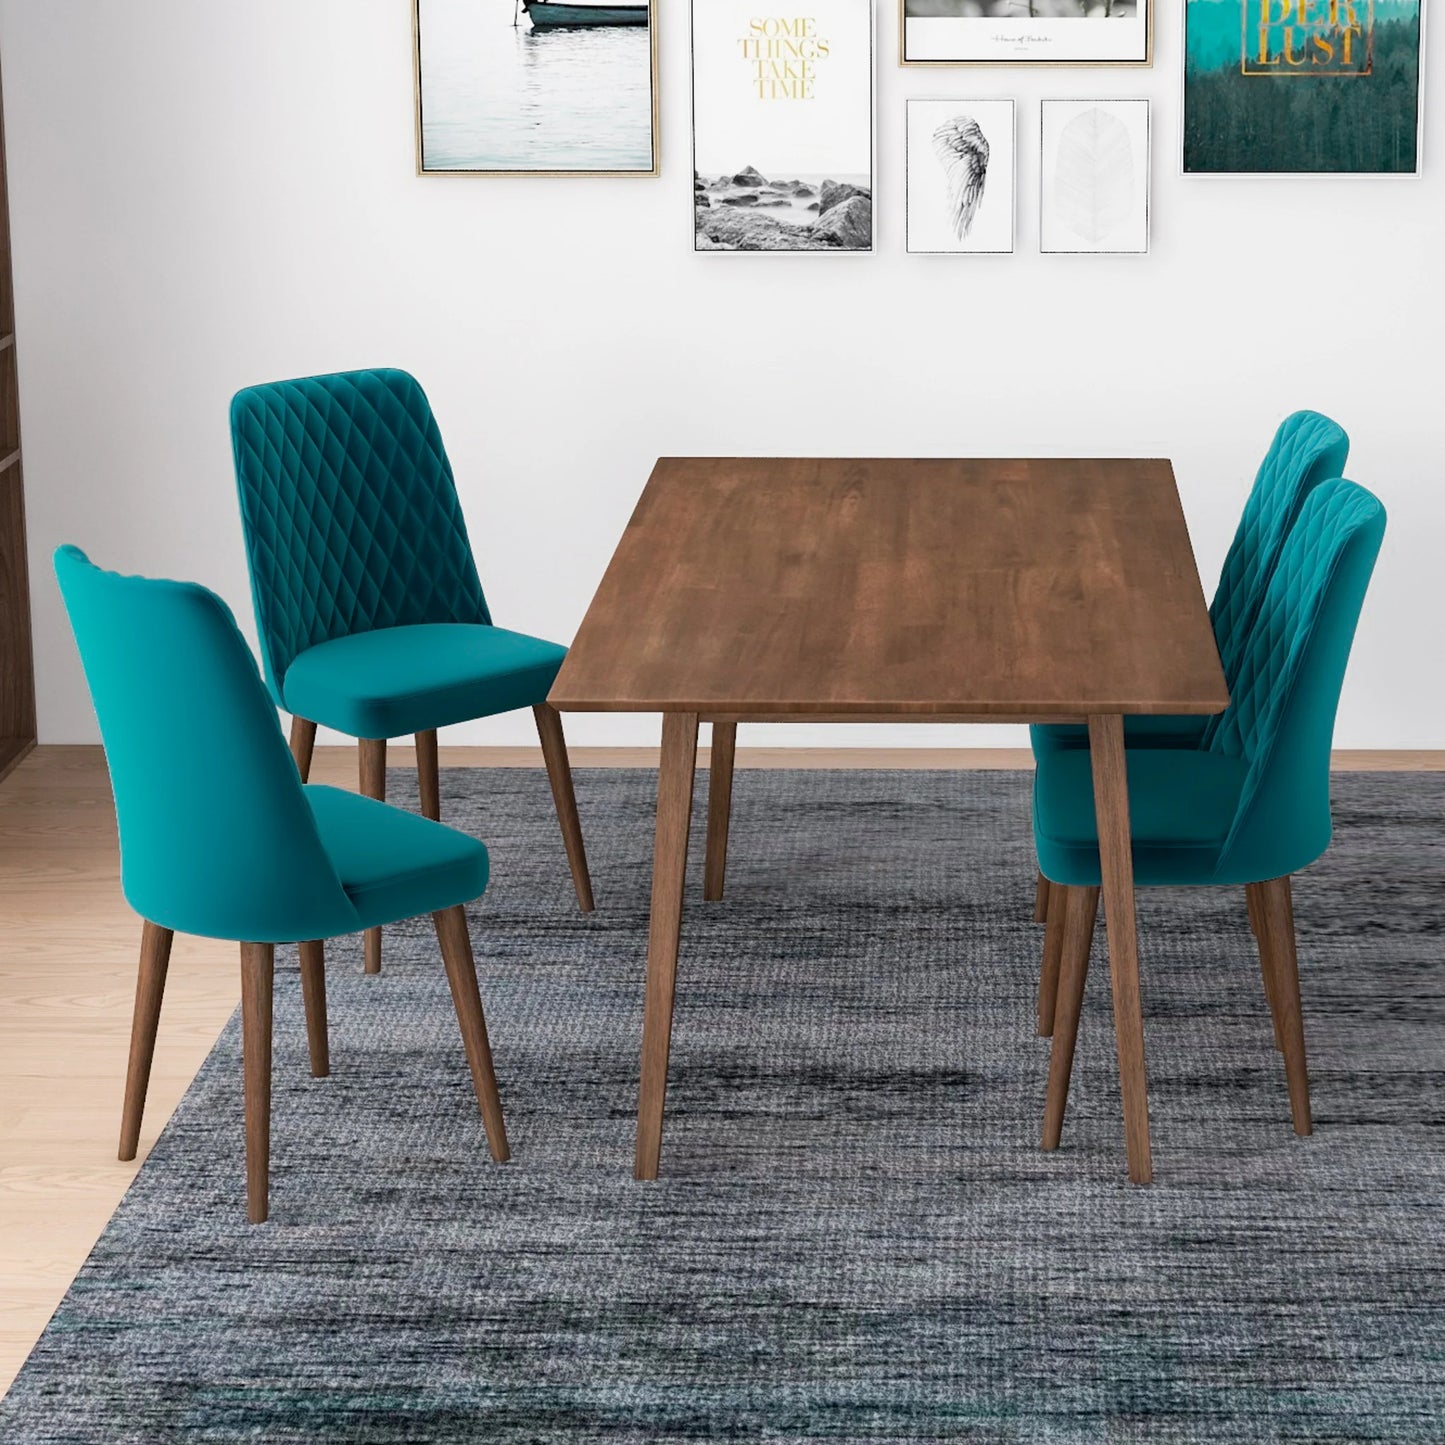 Alpine (Large - Walnut) Dining Set with 4 Evette (Teal Velvet) Dining Chairs